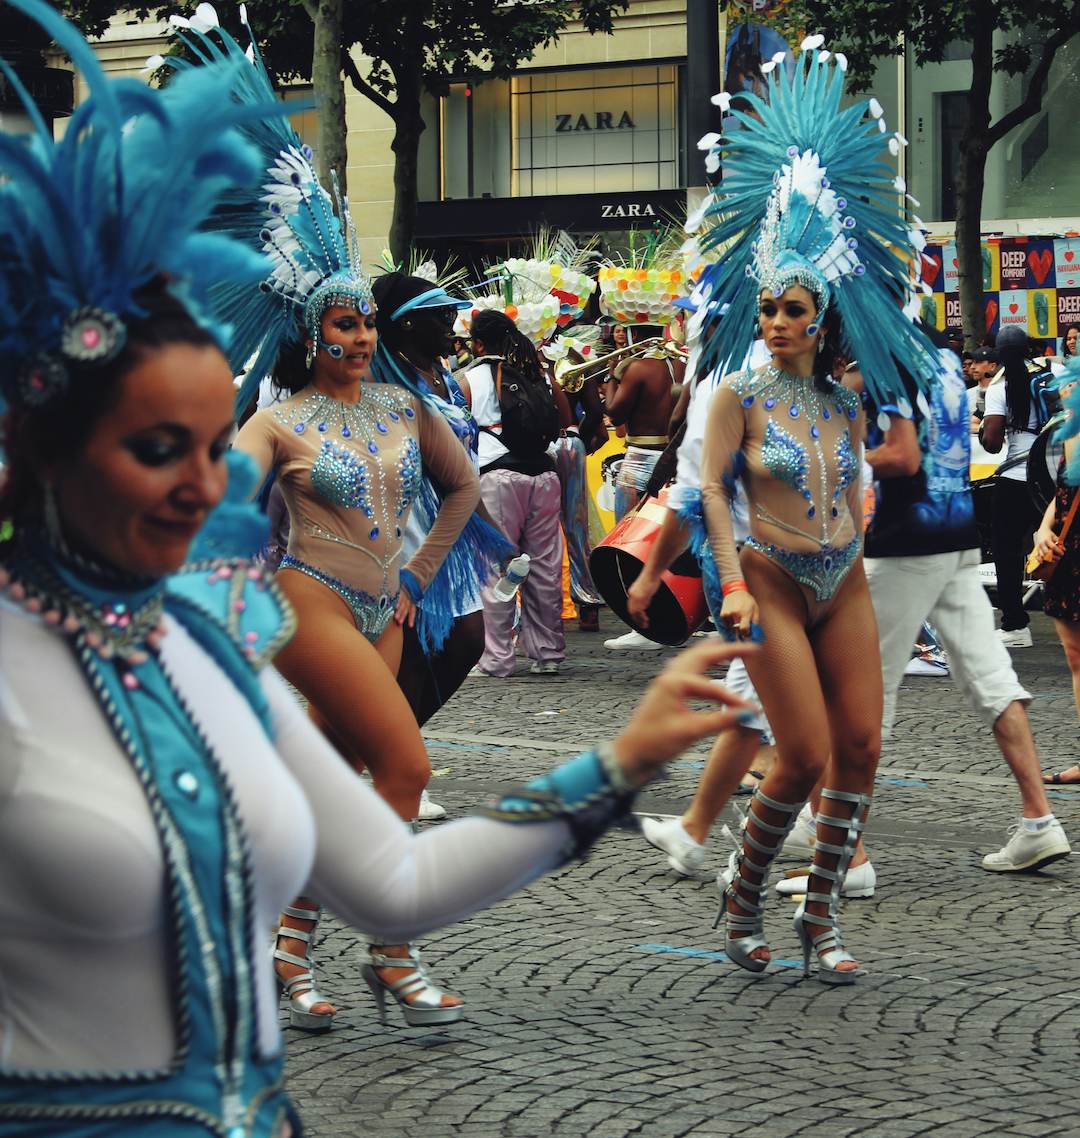 Captivating Costumes and Masks The Theatrical Splendor of Brazilian Carnival - Image